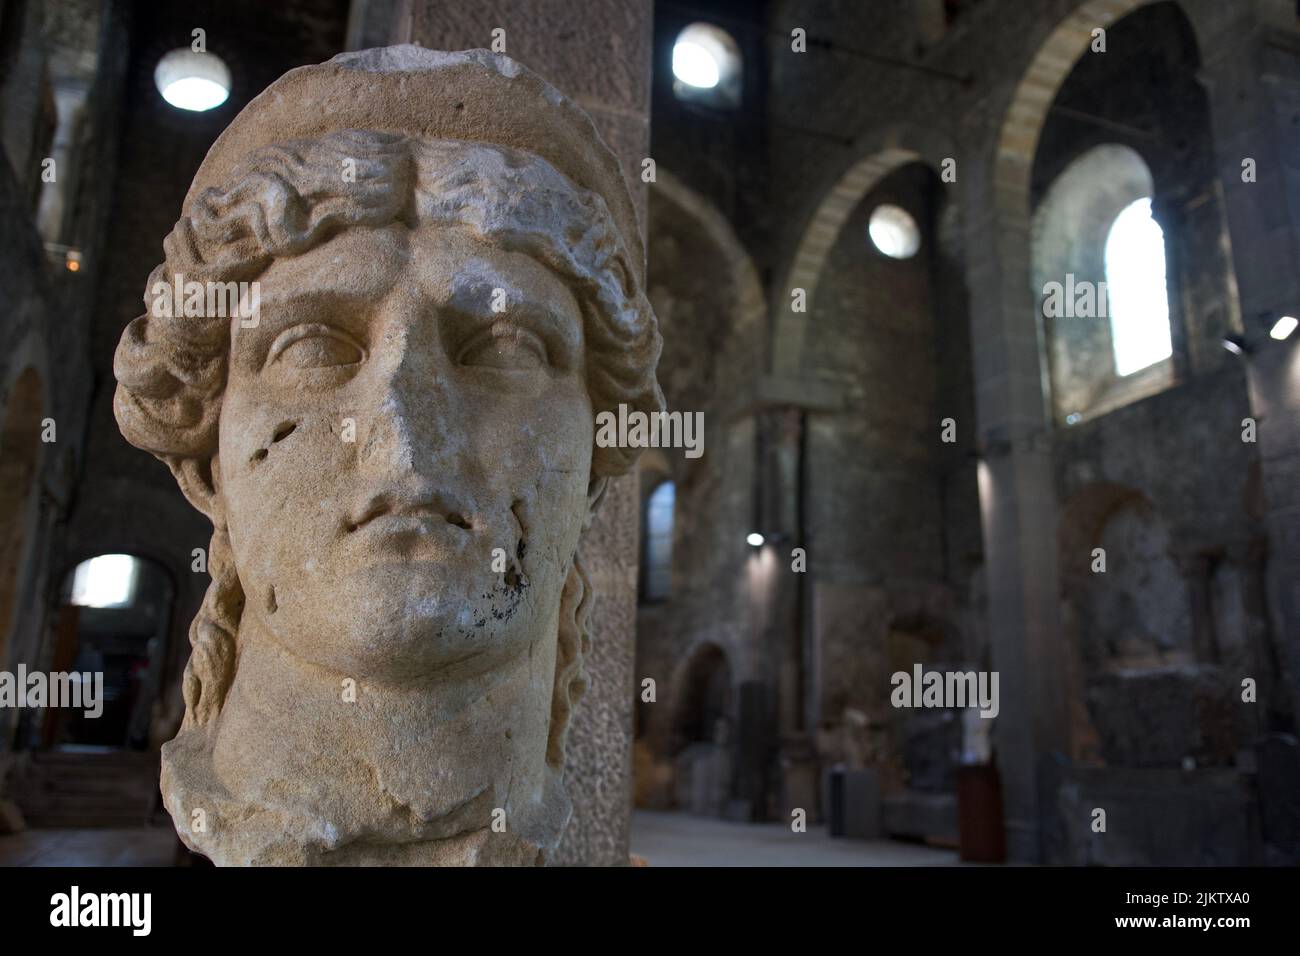 Beautiful marble statue of the head of the Juno Roman goddess dating back to the first century BC. It is located in the Saint Peter Church of Vienne. Stock Photo